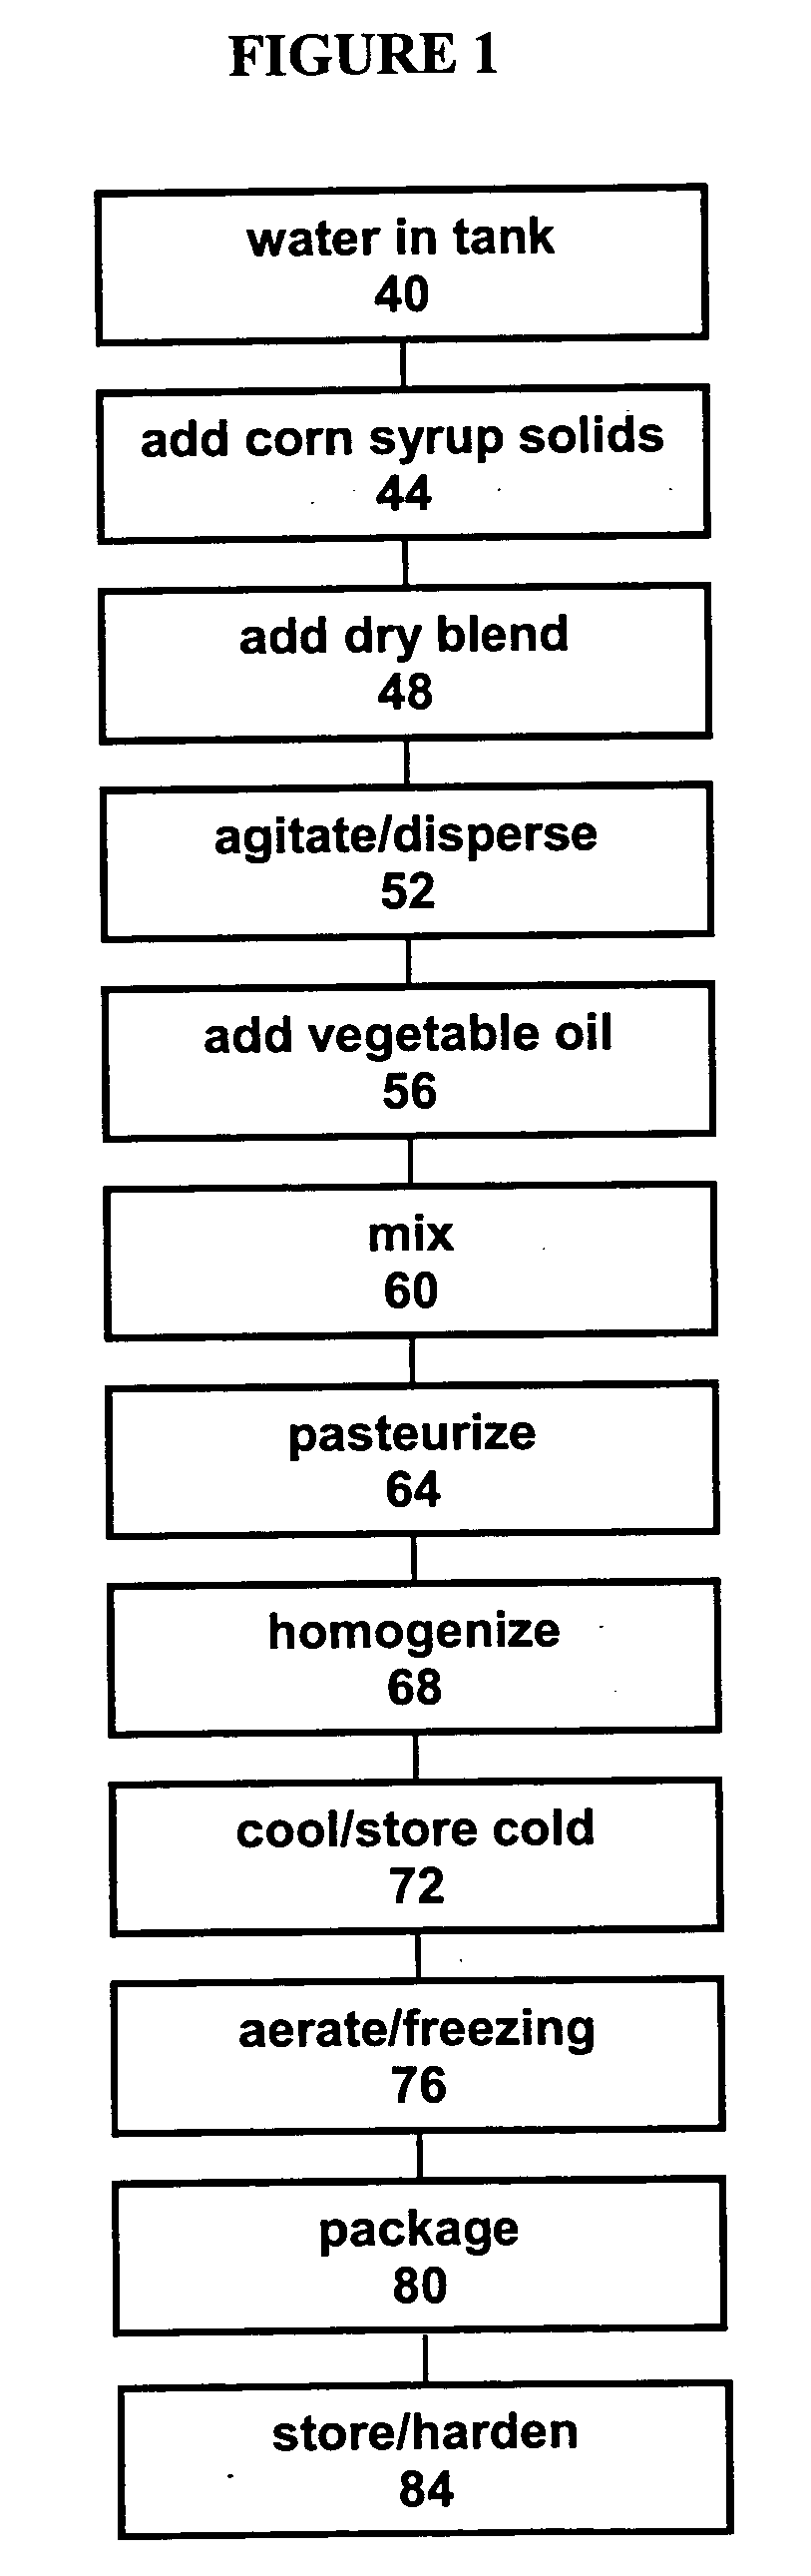 Nutritional frozen dessert formulations and methods of manufacture